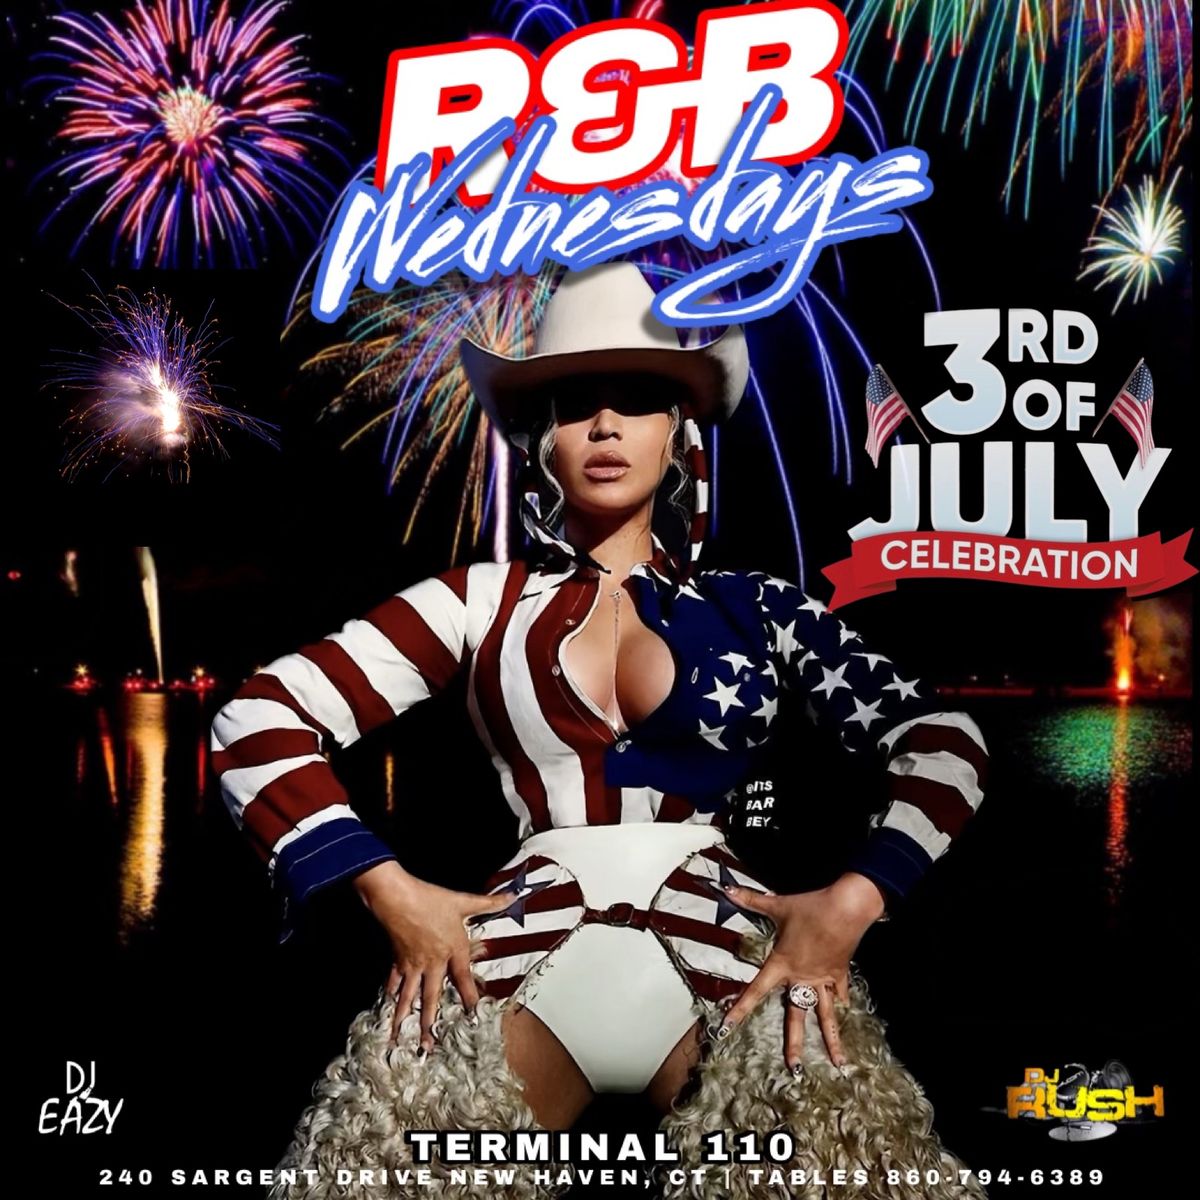 The Collective Vibe\u2019s RnB Wednesdays Pre 4th of July celebration